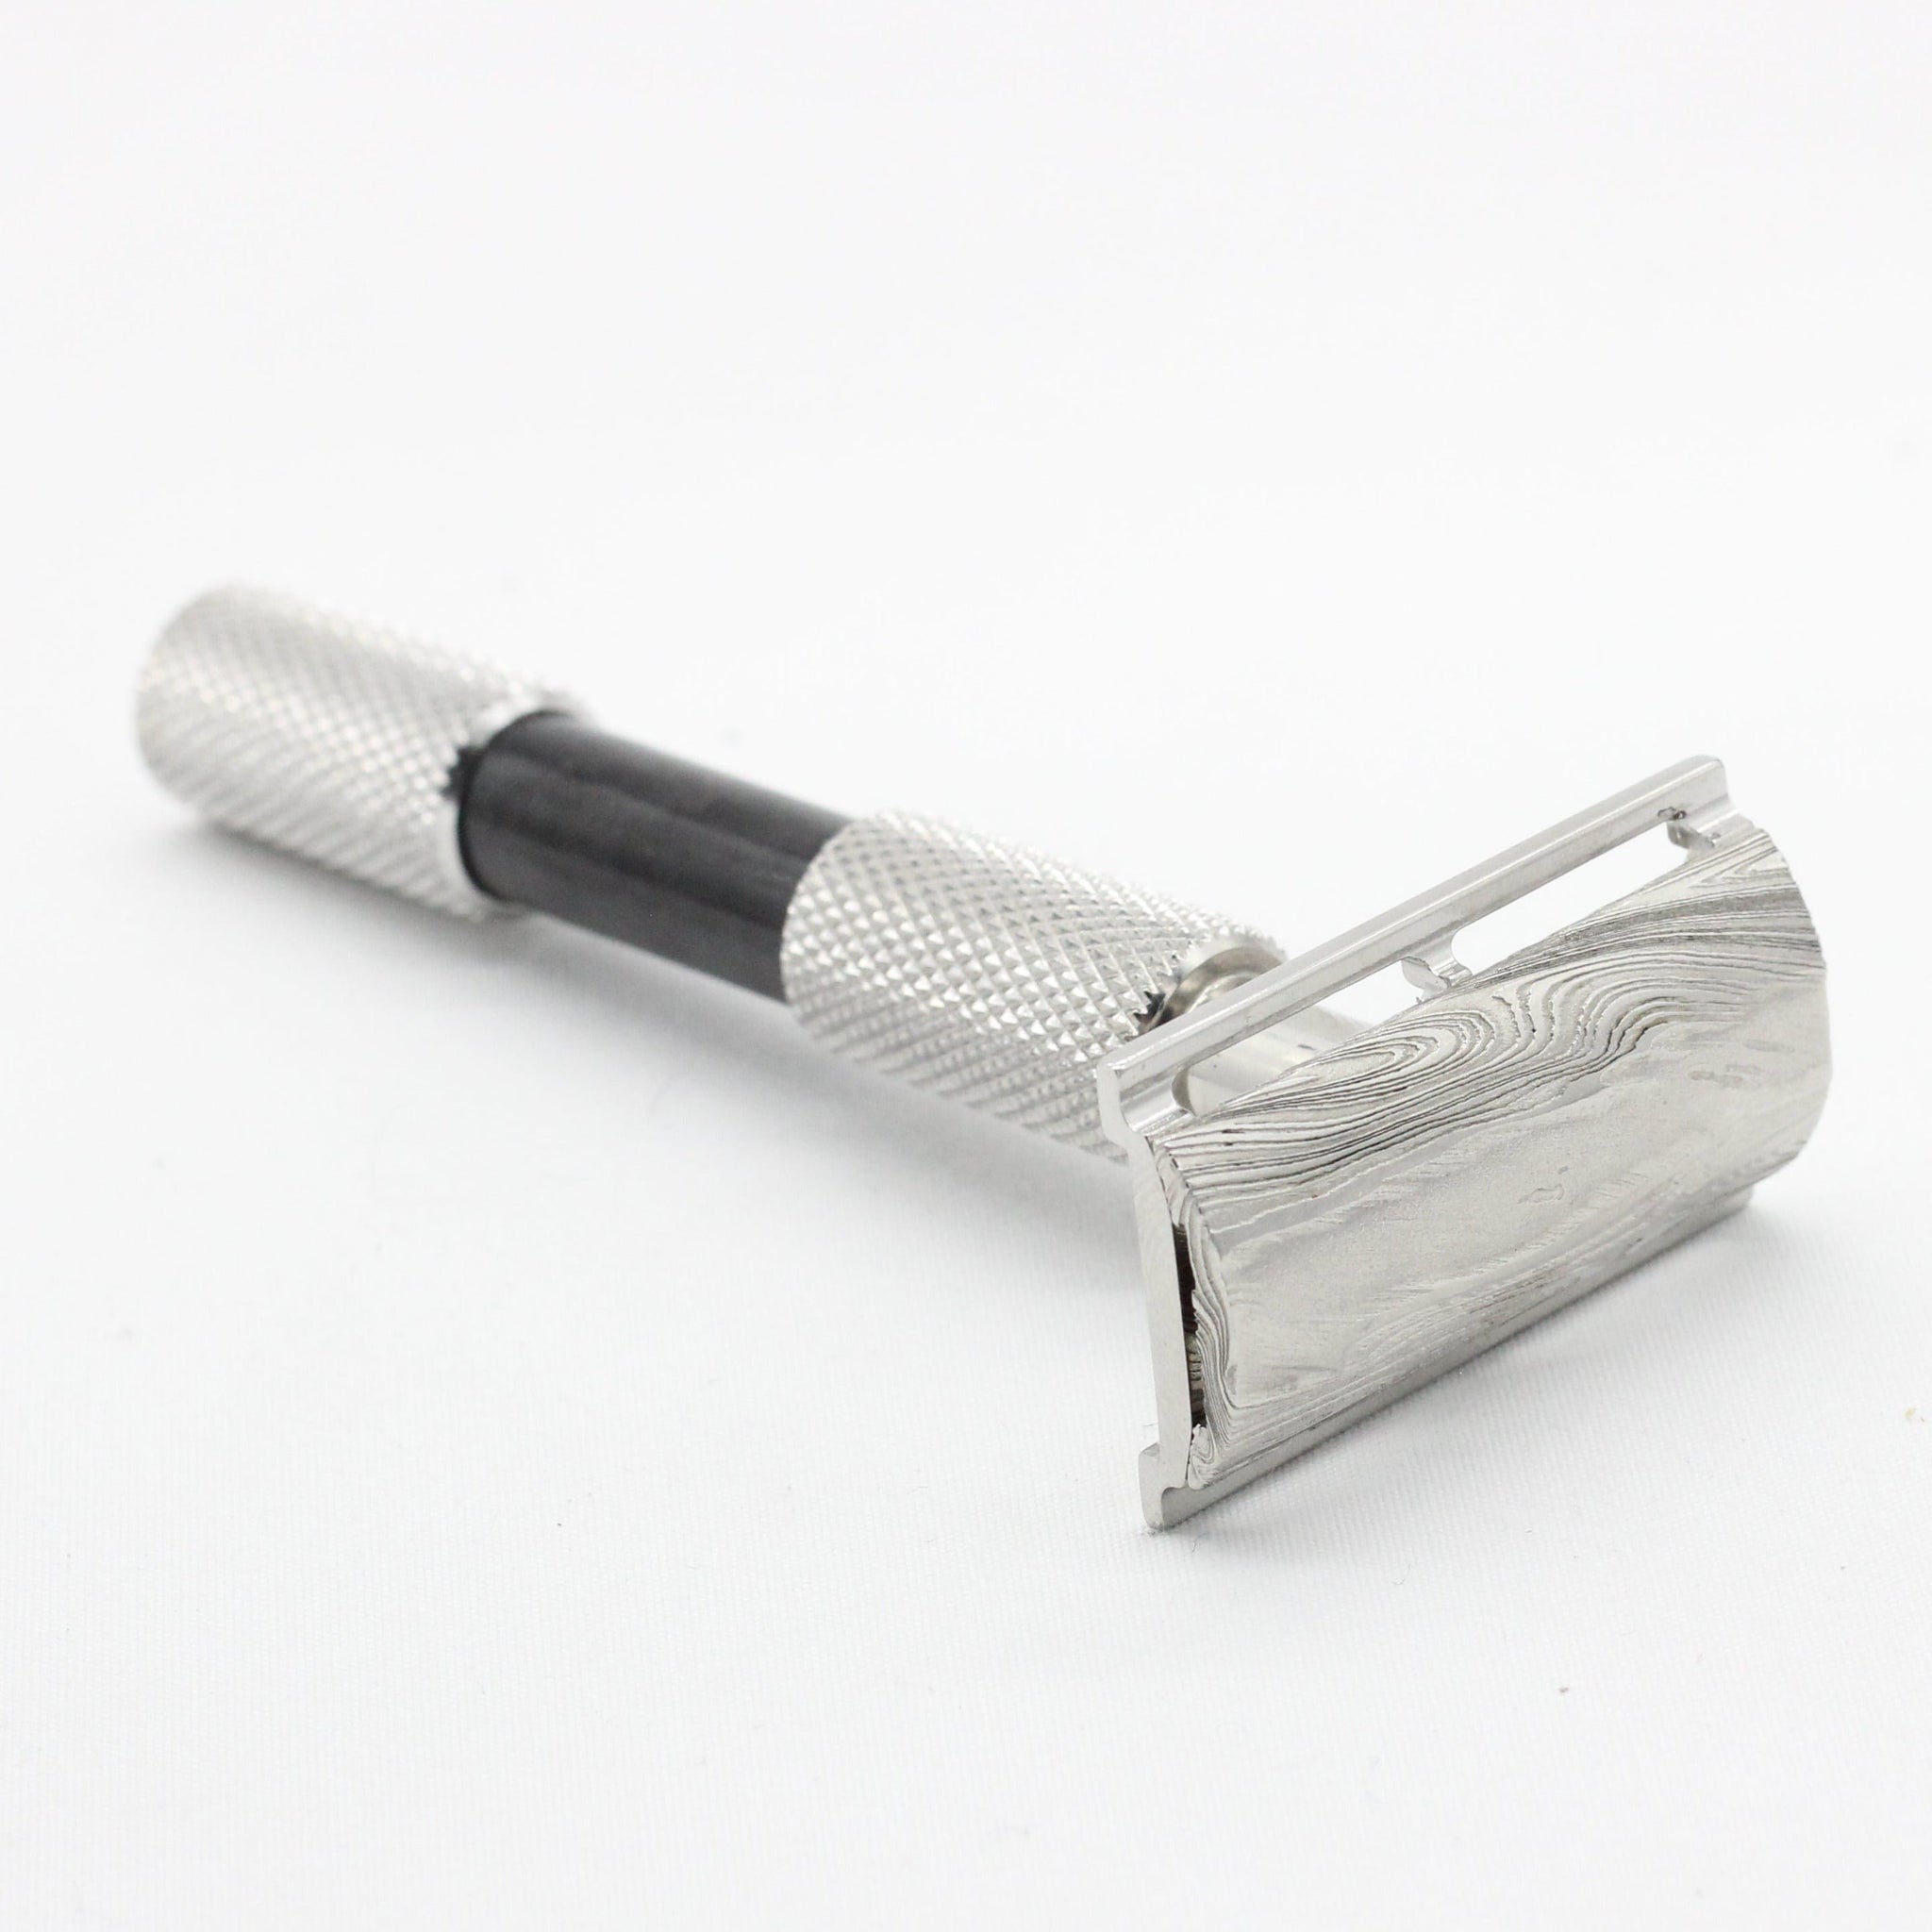 Stainless Damascus with twist pattern single edge razor a double edge safety razor for wet shaving polished grade 304 and 316 - For blade placement in shaving - Right side view